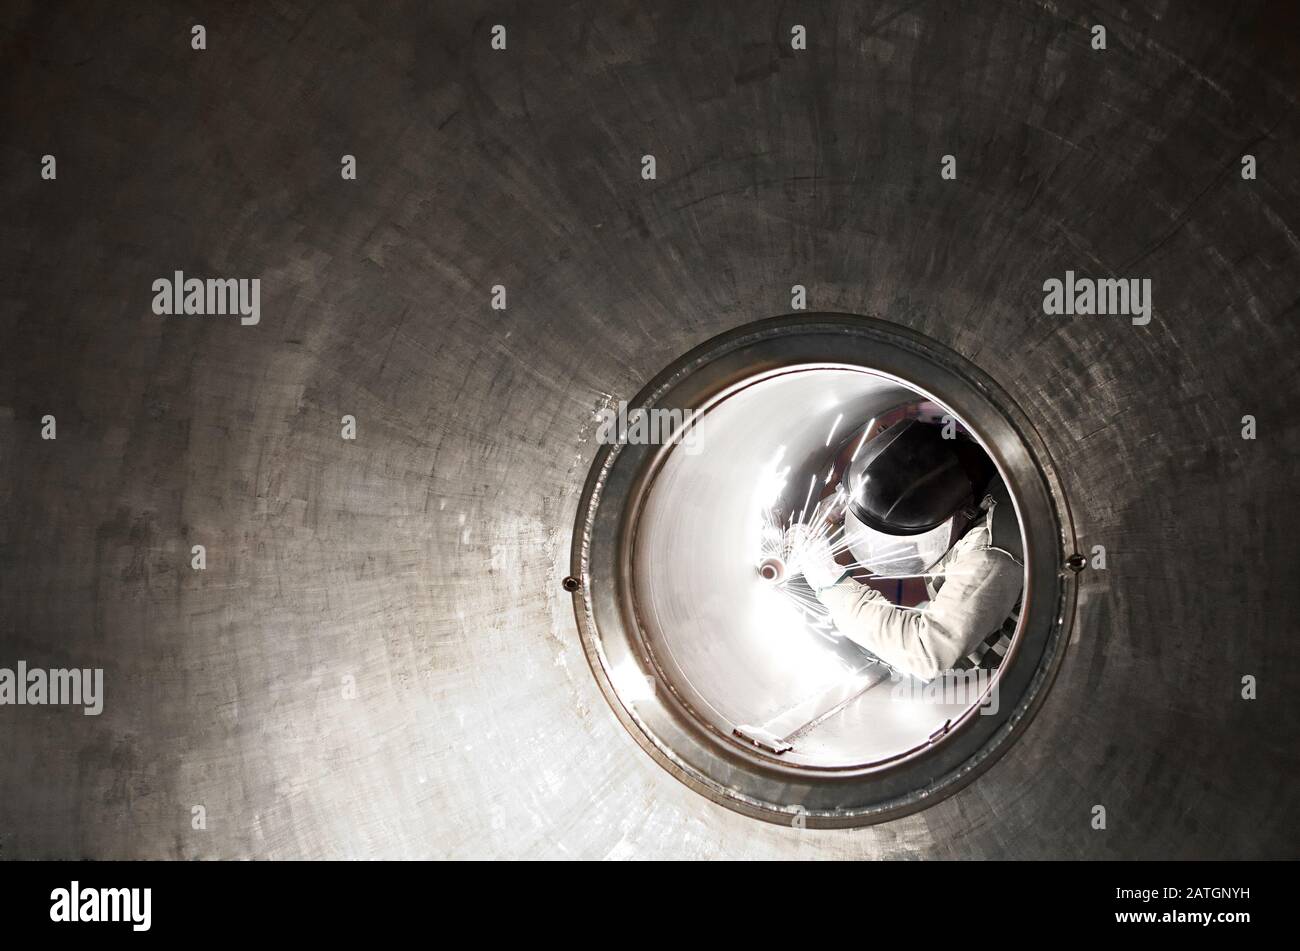 Welder or metal worker working inside a tunnel viewed down the length with receding perspective framing him as he works Stock Photo